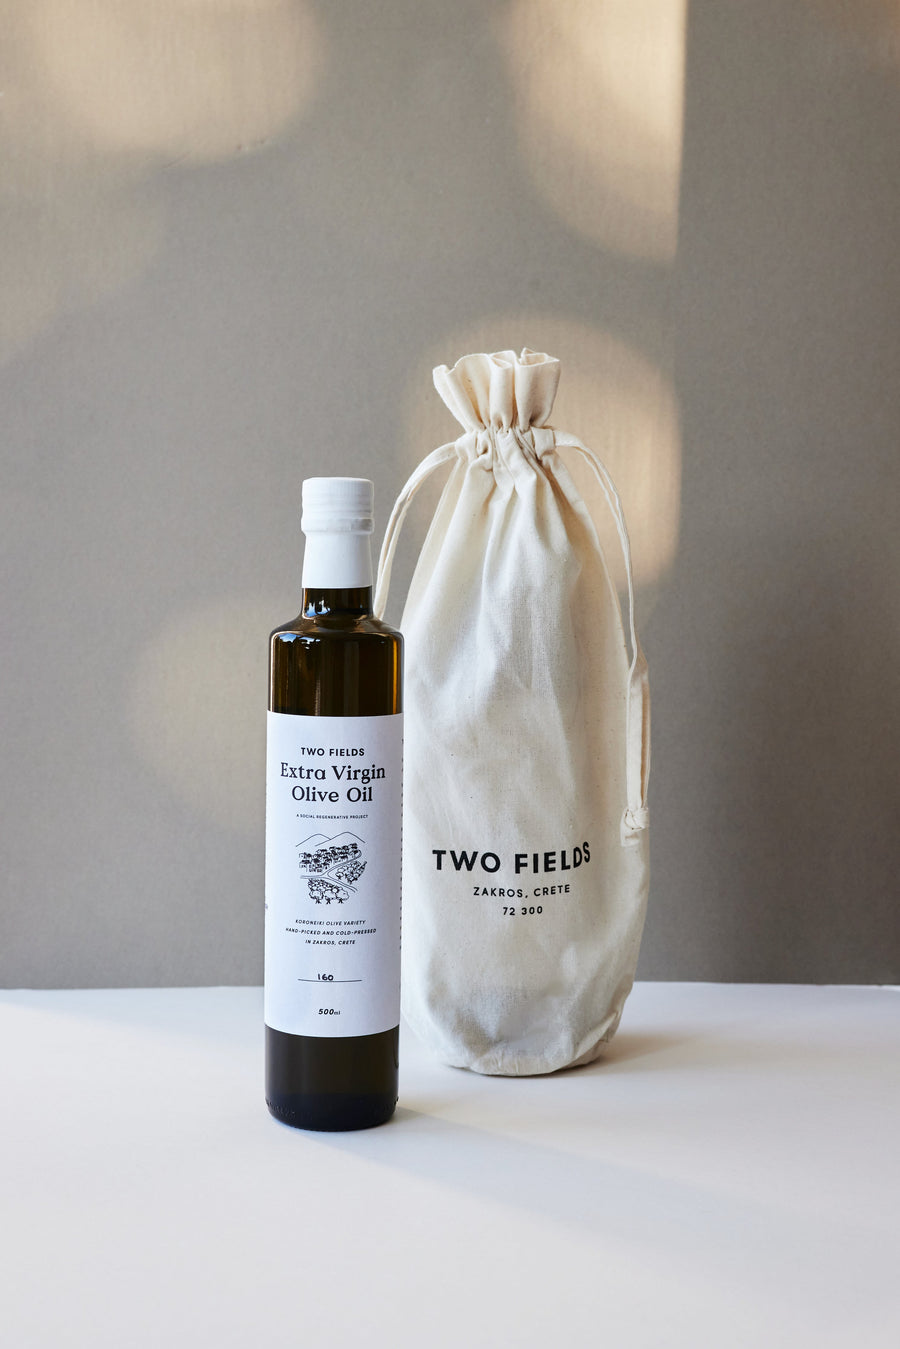 One Year Gift Subscription | The Gift Set '22 | Oregano, Salt, Soap, Oil